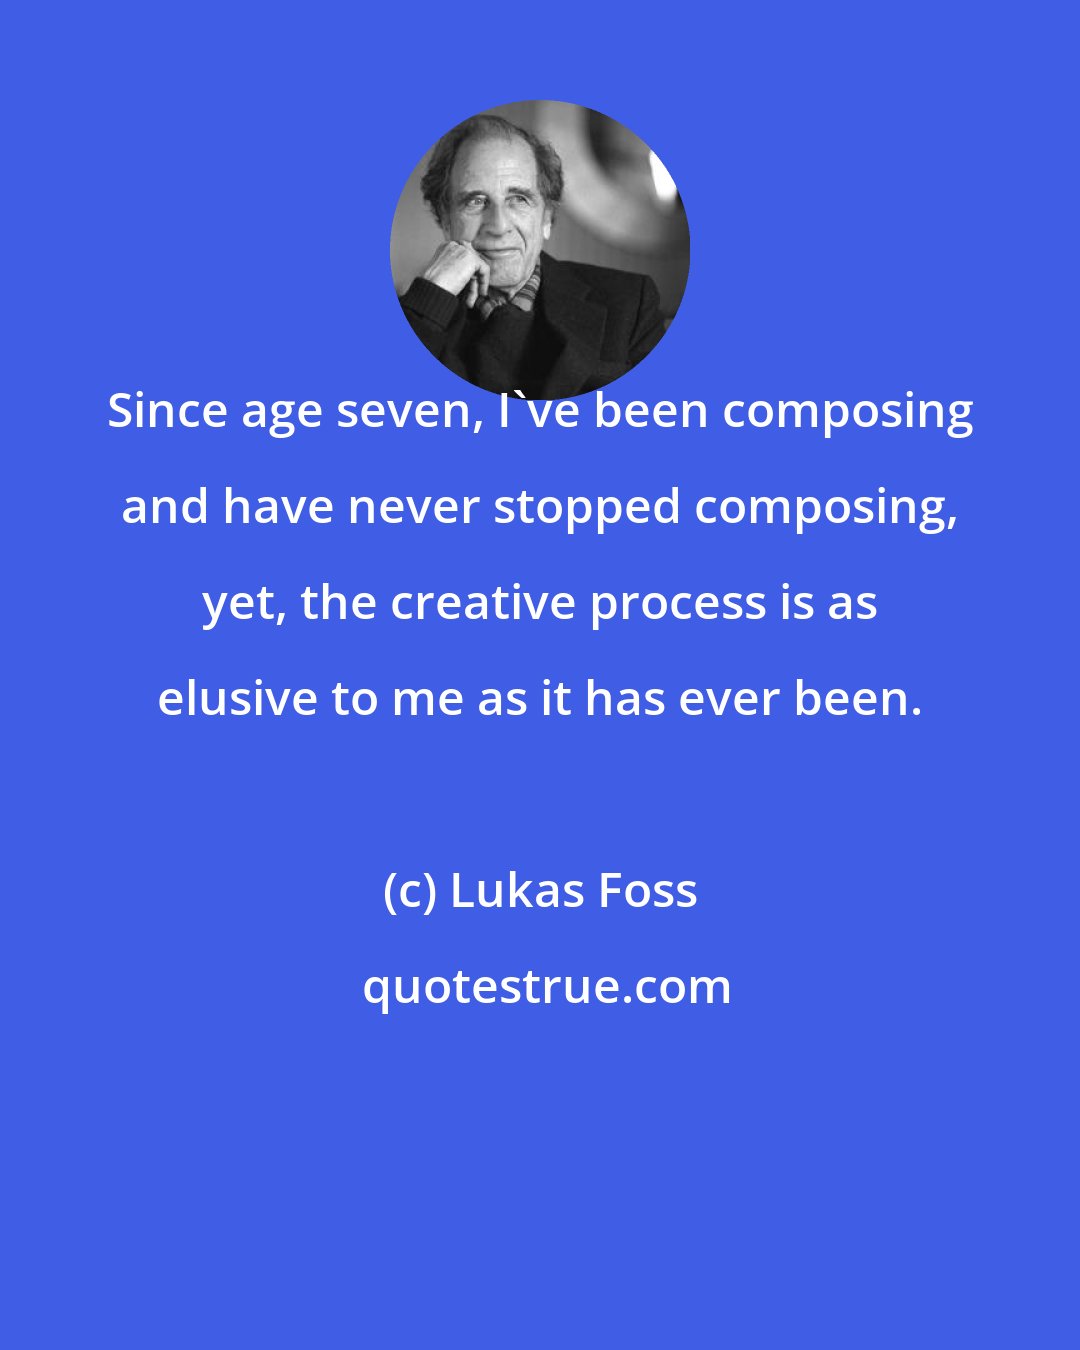 Lukas Foss: Since age seven, I've been composing and have never stopped composing, yet, the creative process is as elusive to me as it has ever been.